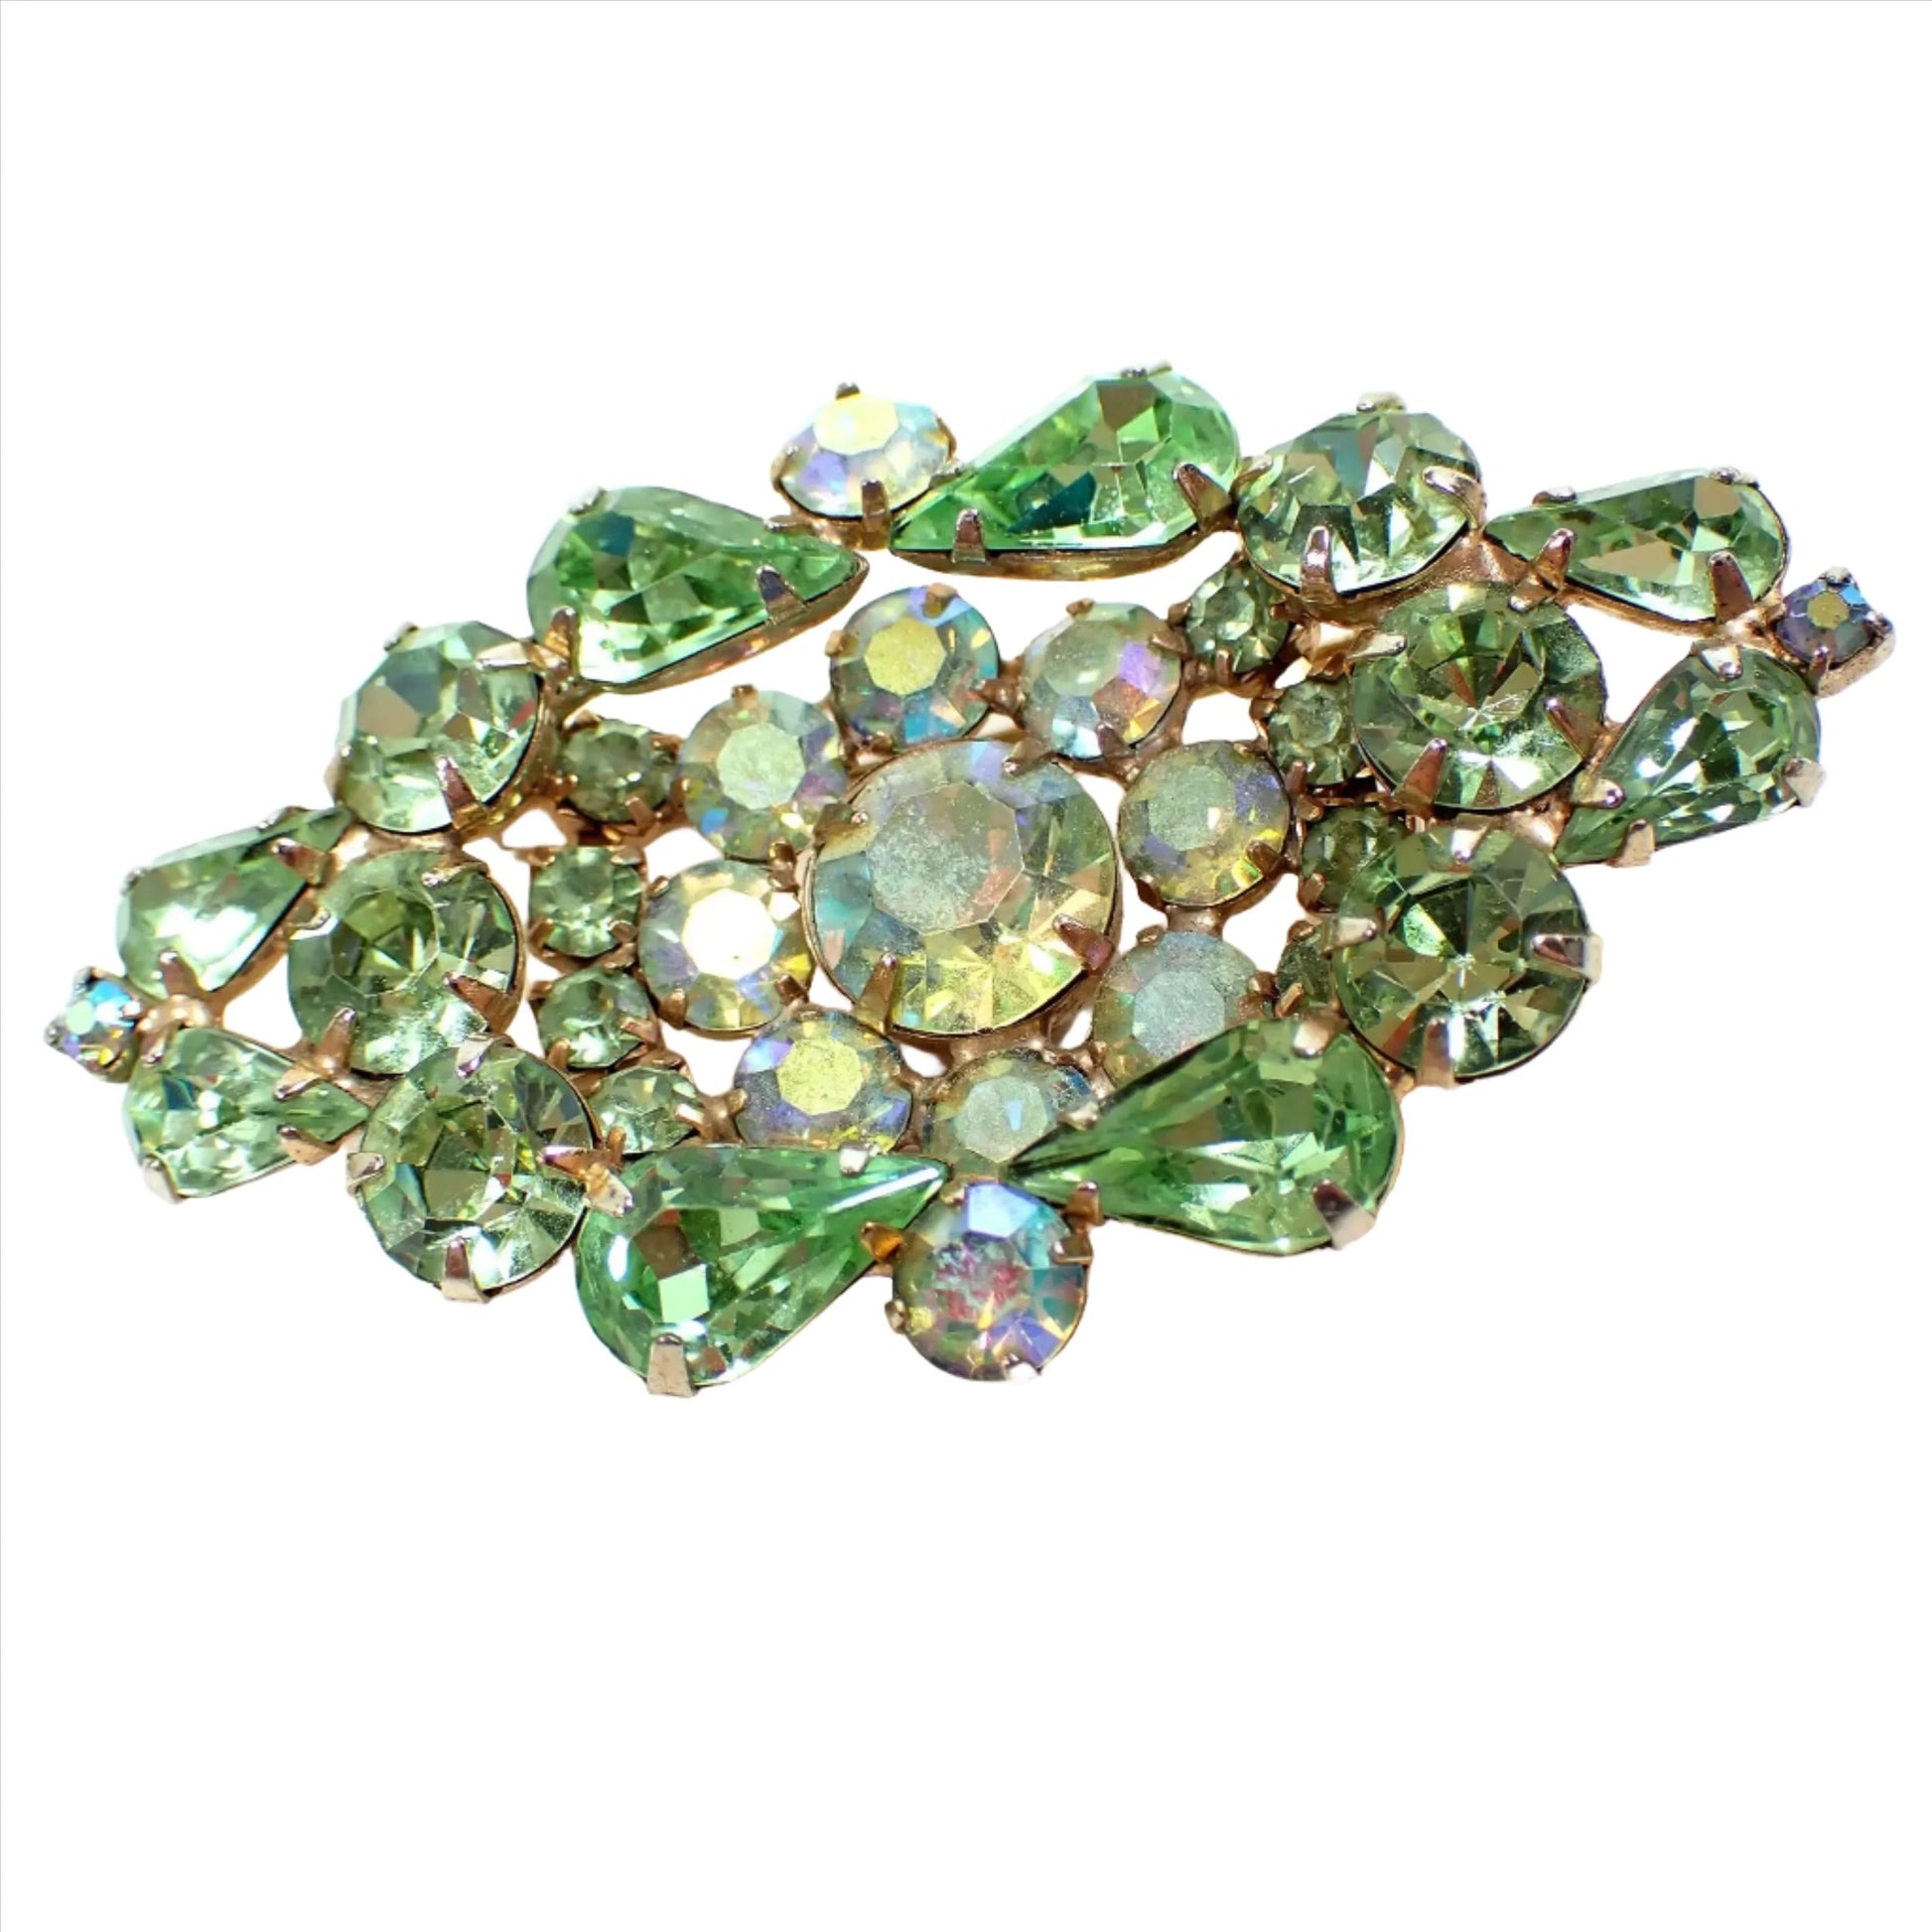 Front view of the Mid Century vintage Weiss crystal rhinestone brooch pin. The metal is gold tone in color and it is shaped like a tiered wide diamond shape. There are green teardrop and round rhinestones and AB round green rhinestones making up the entire front of the brooch.